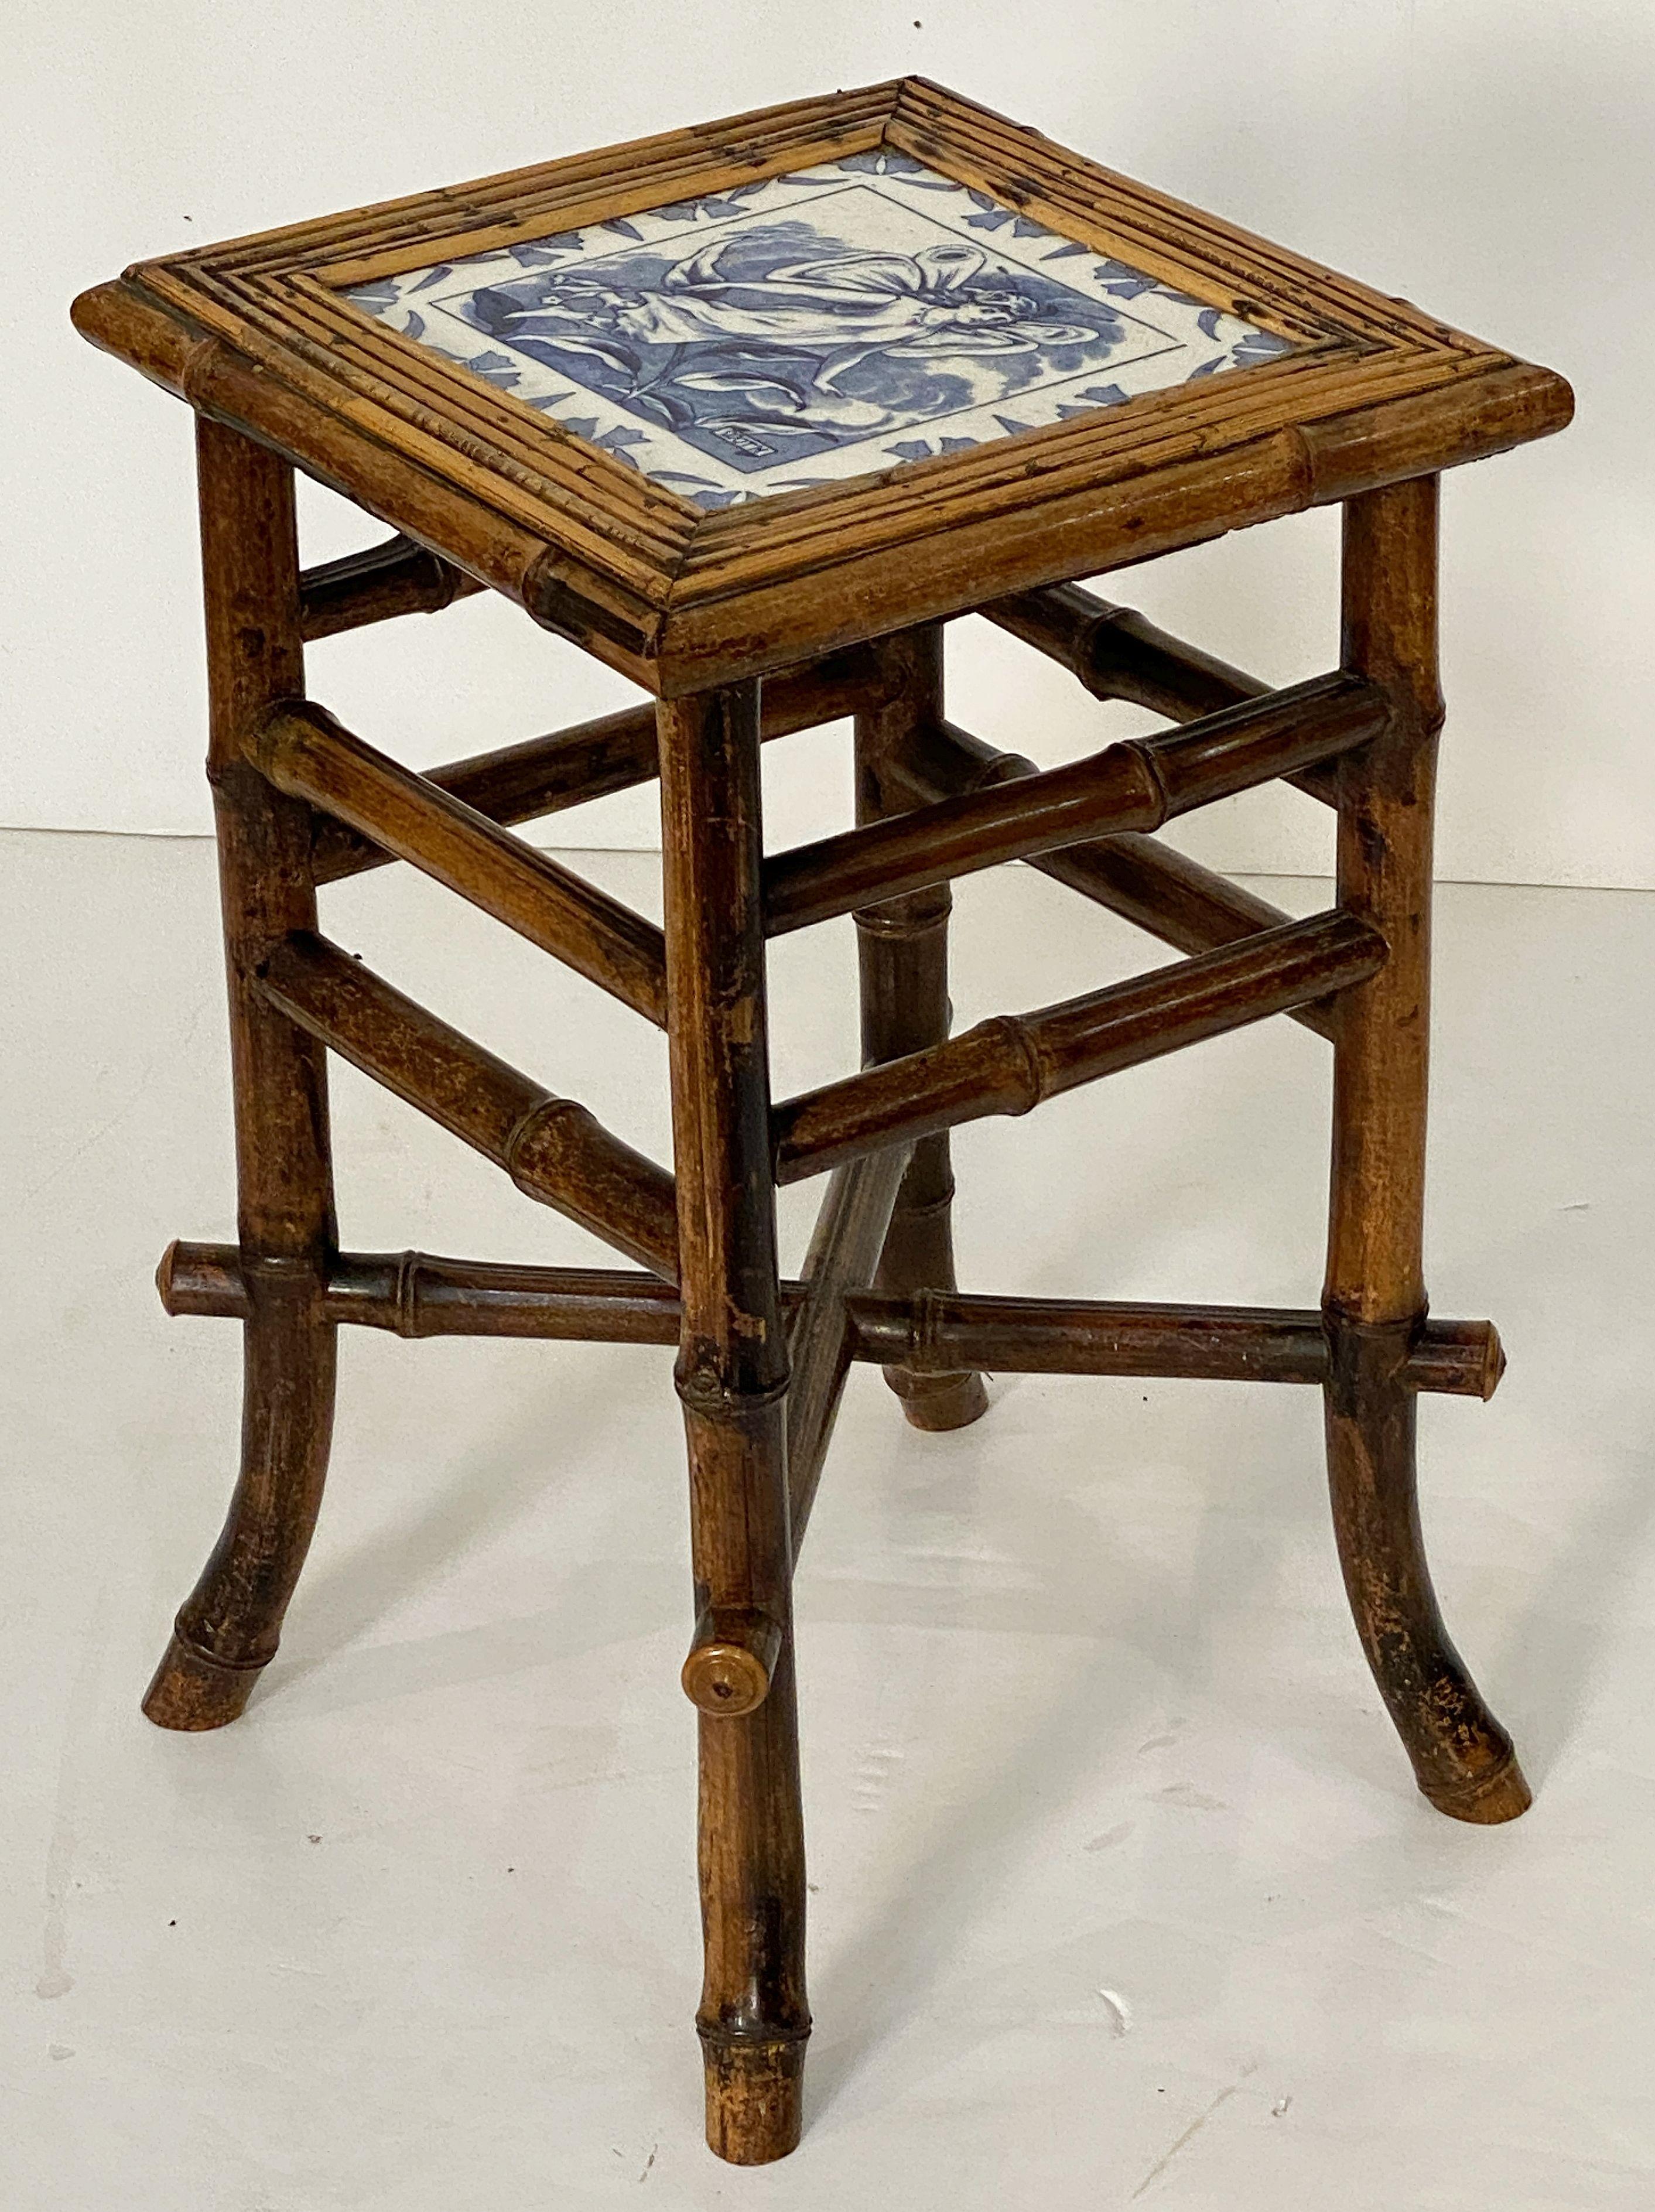 English Bamboo Table or Stool with Tile Seat from the Aesthetic Movement Era For Sale 3